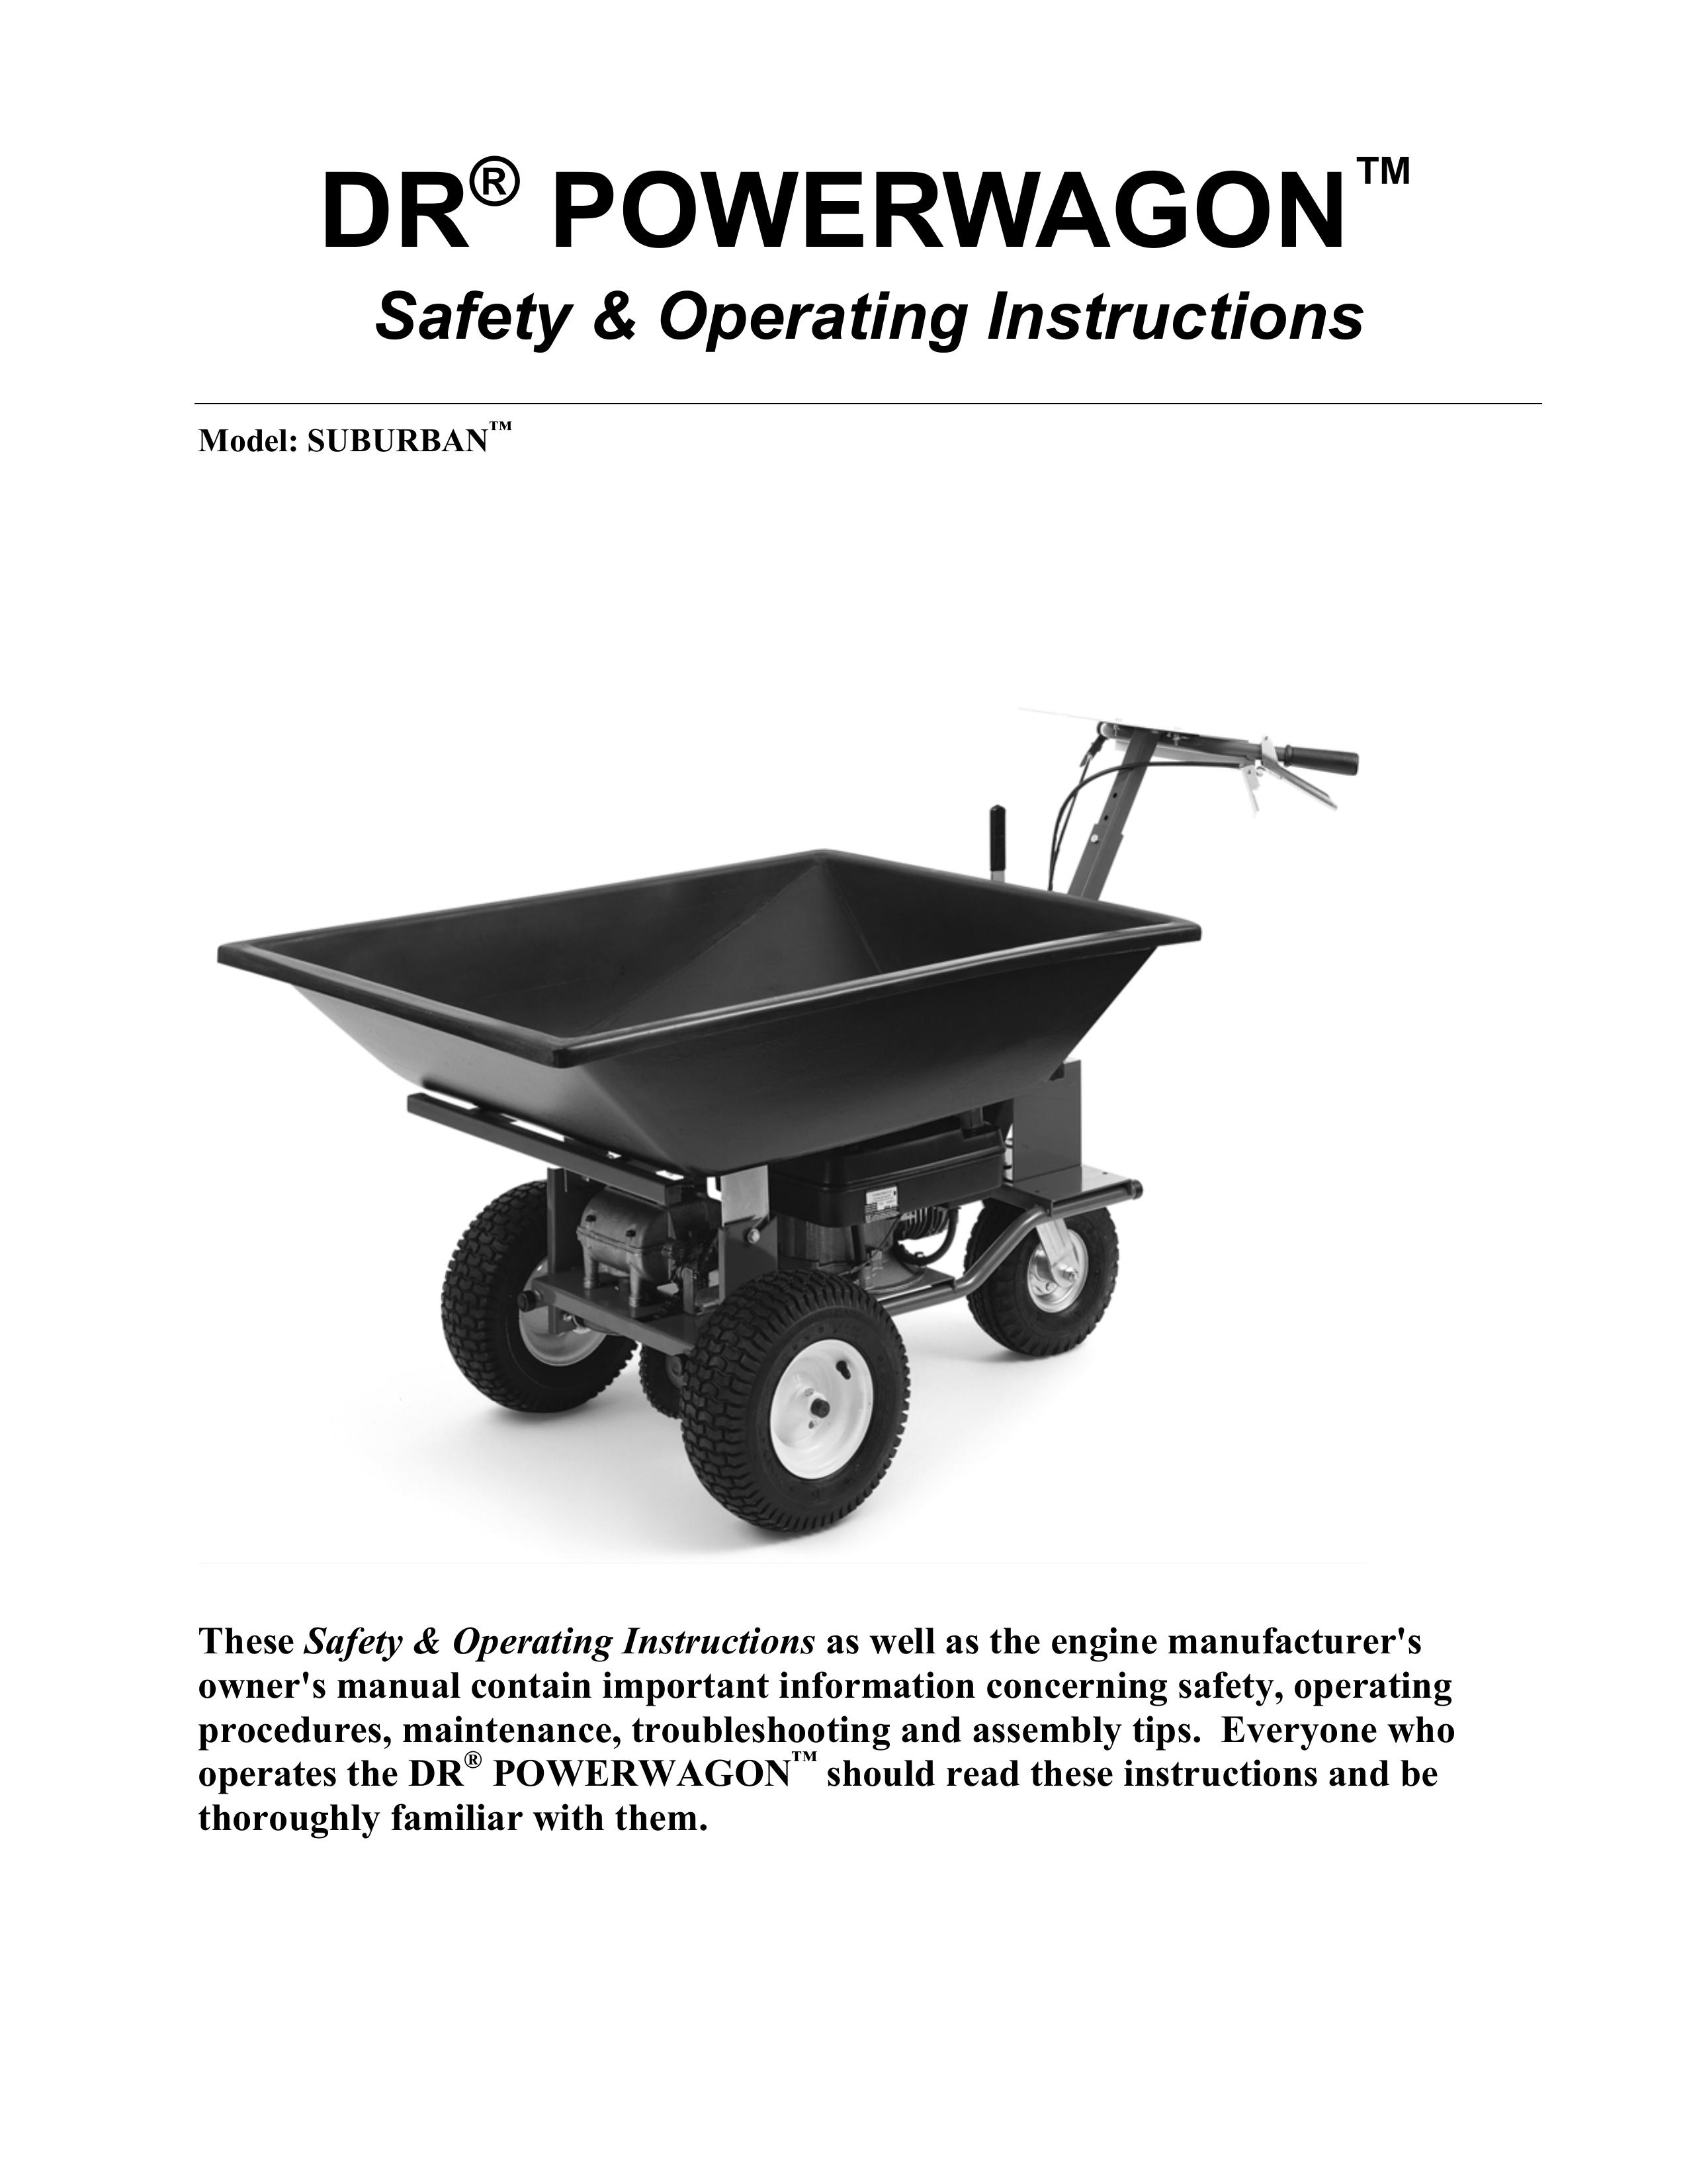 Country Home Products SUBURBANTM Lawn Mower User Manual